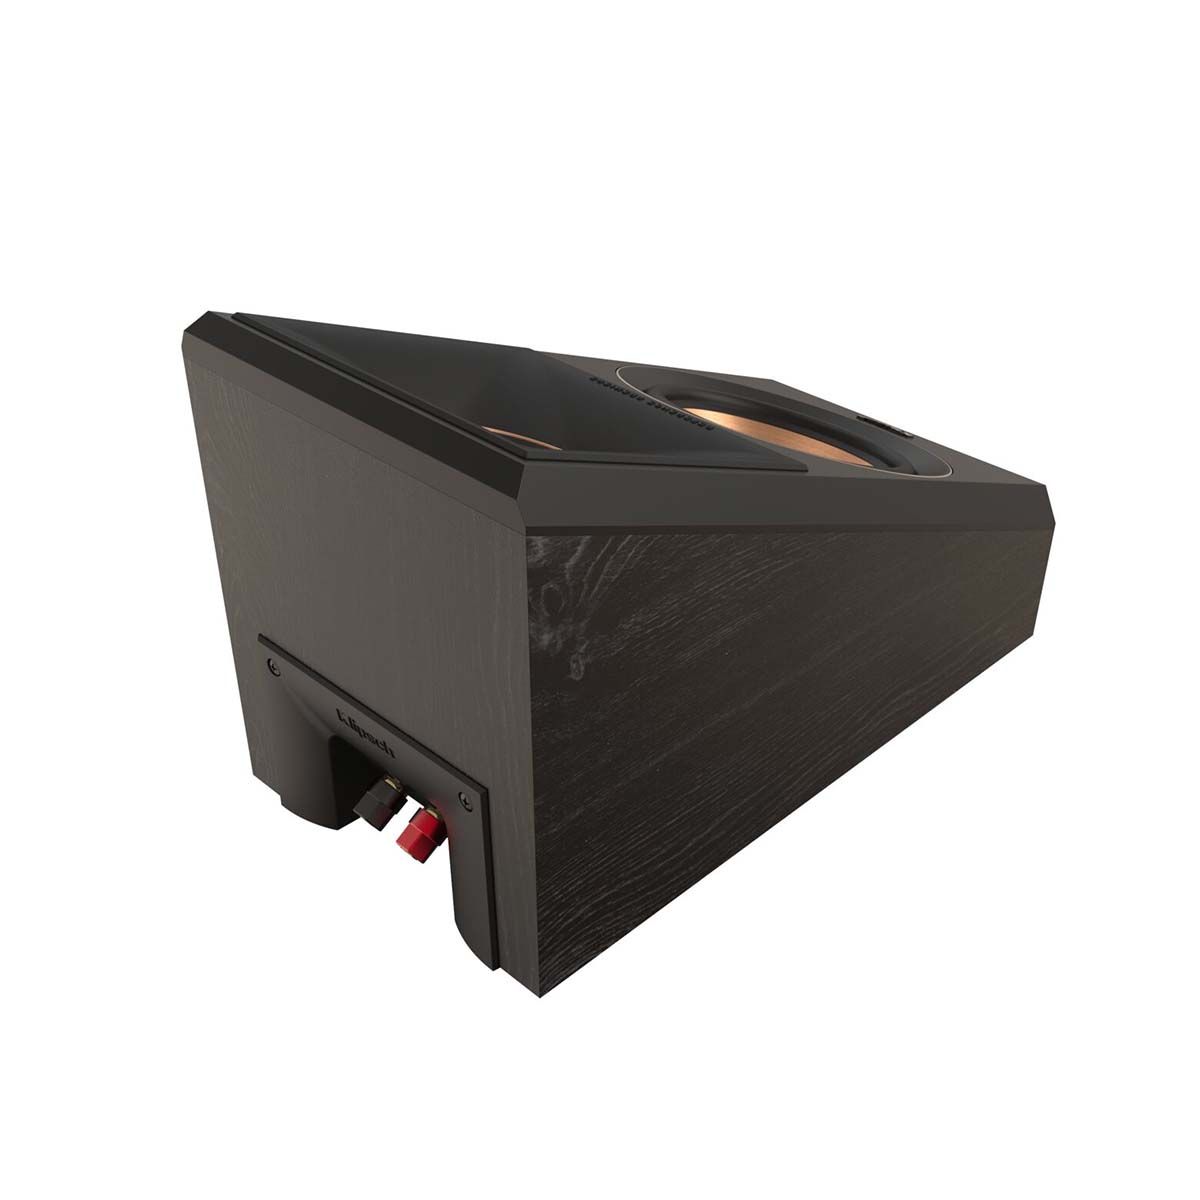 Klipsch RP-500SA II Surround/Atmos Speakers - Ebony - Pair - angled rear view of single without grill